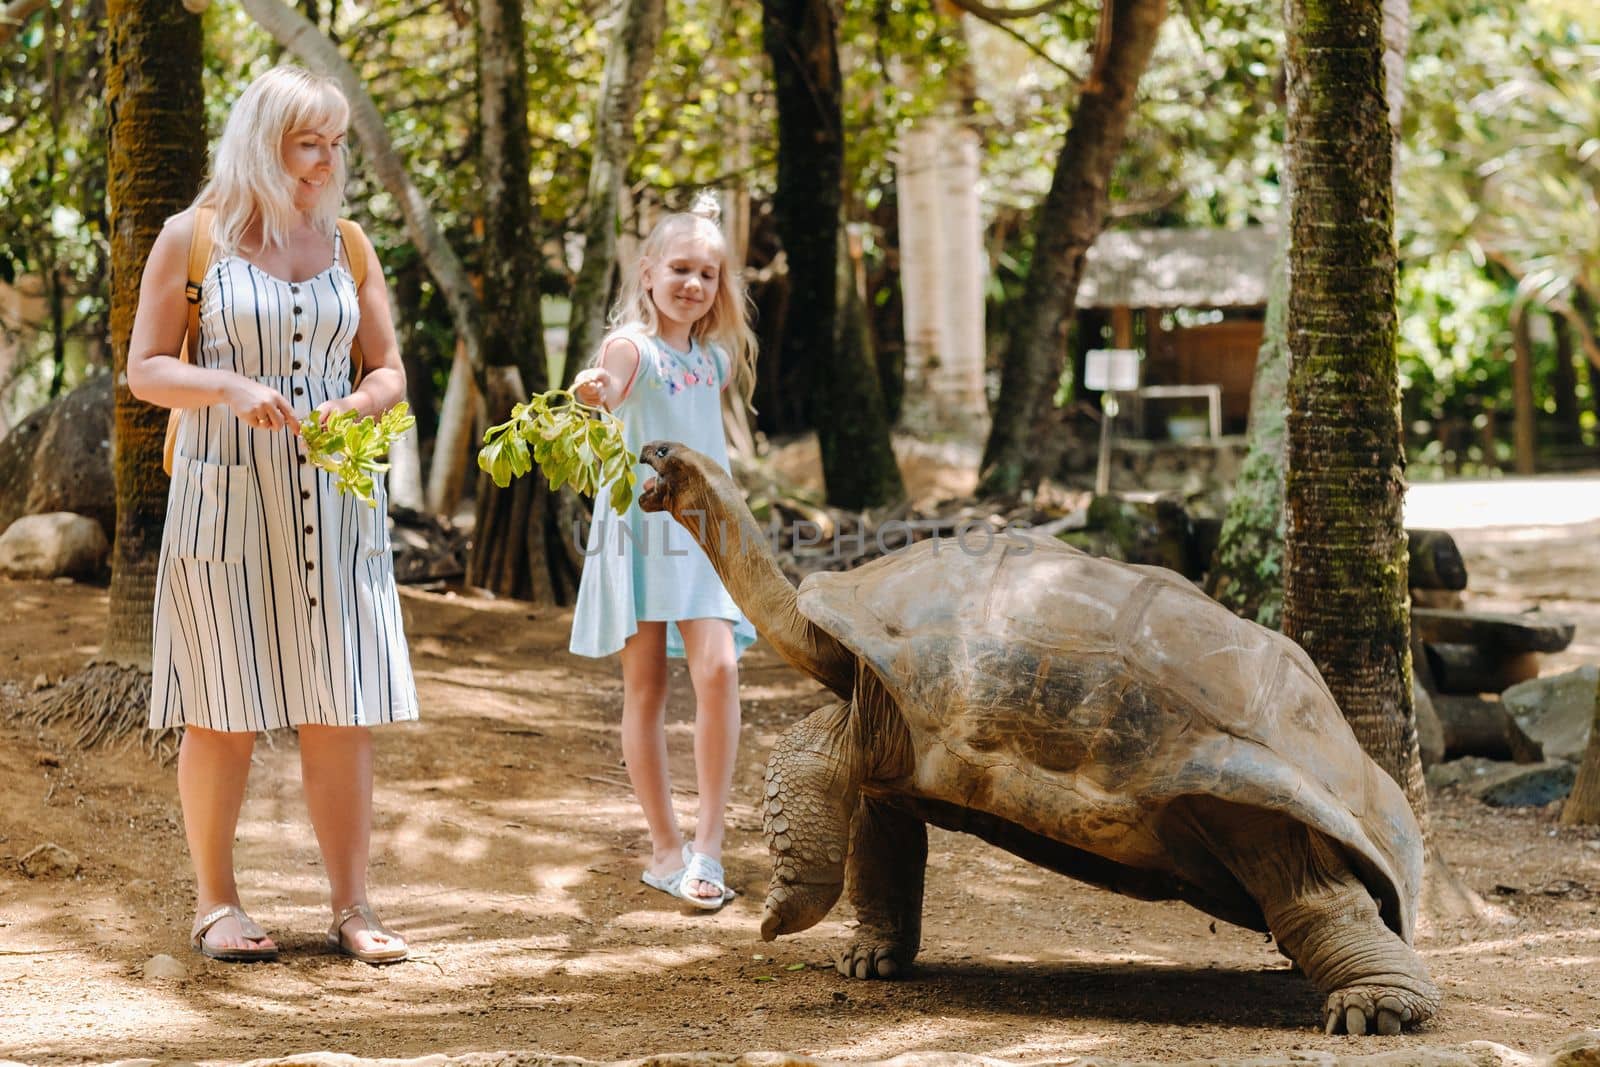 Fun activities in Mauritius. Family feeding giant tortoise in the zoo of the island of Mauritius by Lobachad